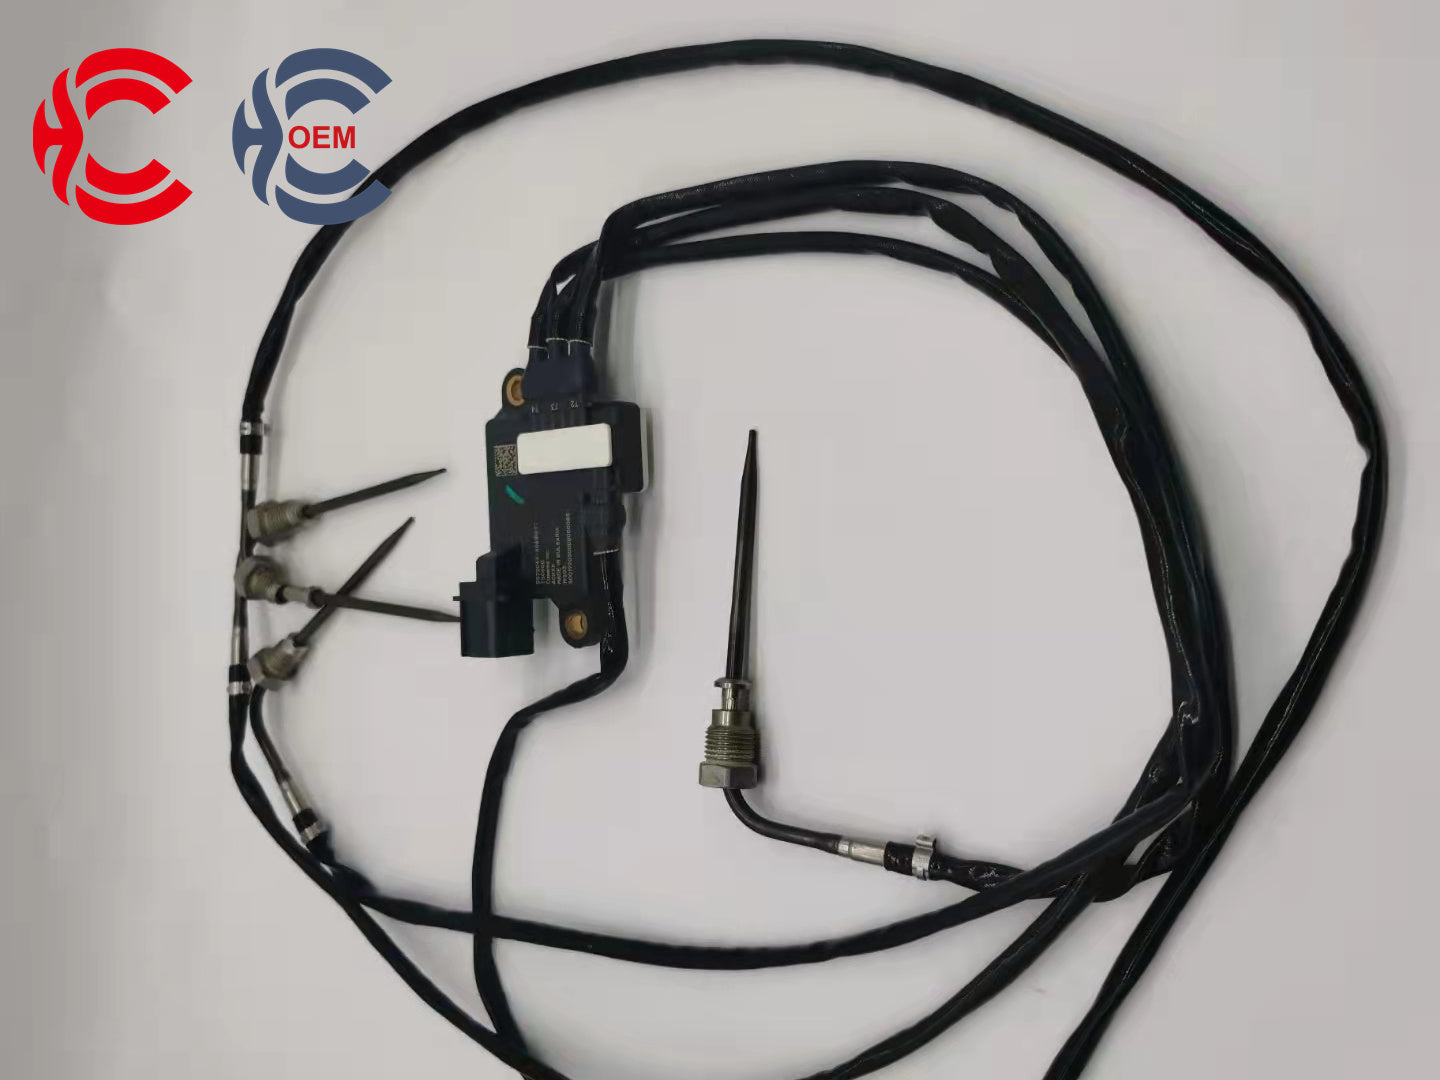 OEM: TS0100 495414 5572047-A061H841Material: MetalColor: SilverOrigin: Made in ChinaWeight: 200gPacking List: 1* Exhaust Gas Temperature Sensor More ServiceWe can provide OEM Manufacturing serviceWe can Be your one-step solution for Auto PartsWe can provide technical scheme for you Feel Free to Contact Us, We will get back to you as soon as possible.